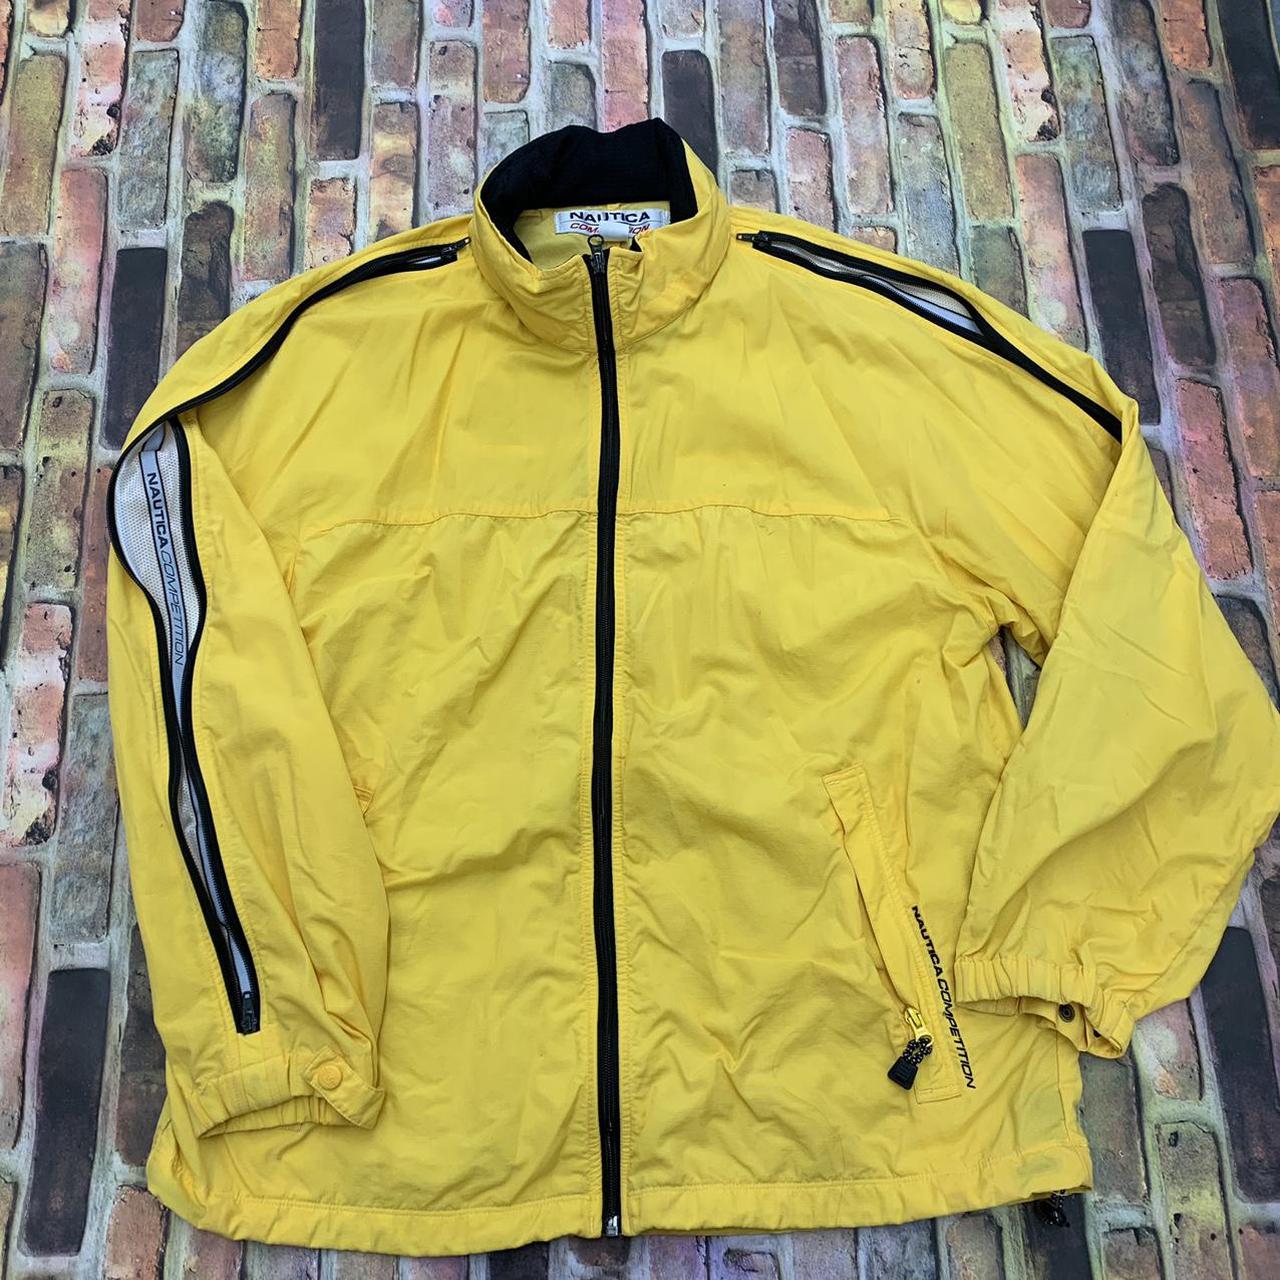 Vintage Nautica Competition jacket in yellow. From... - Depop